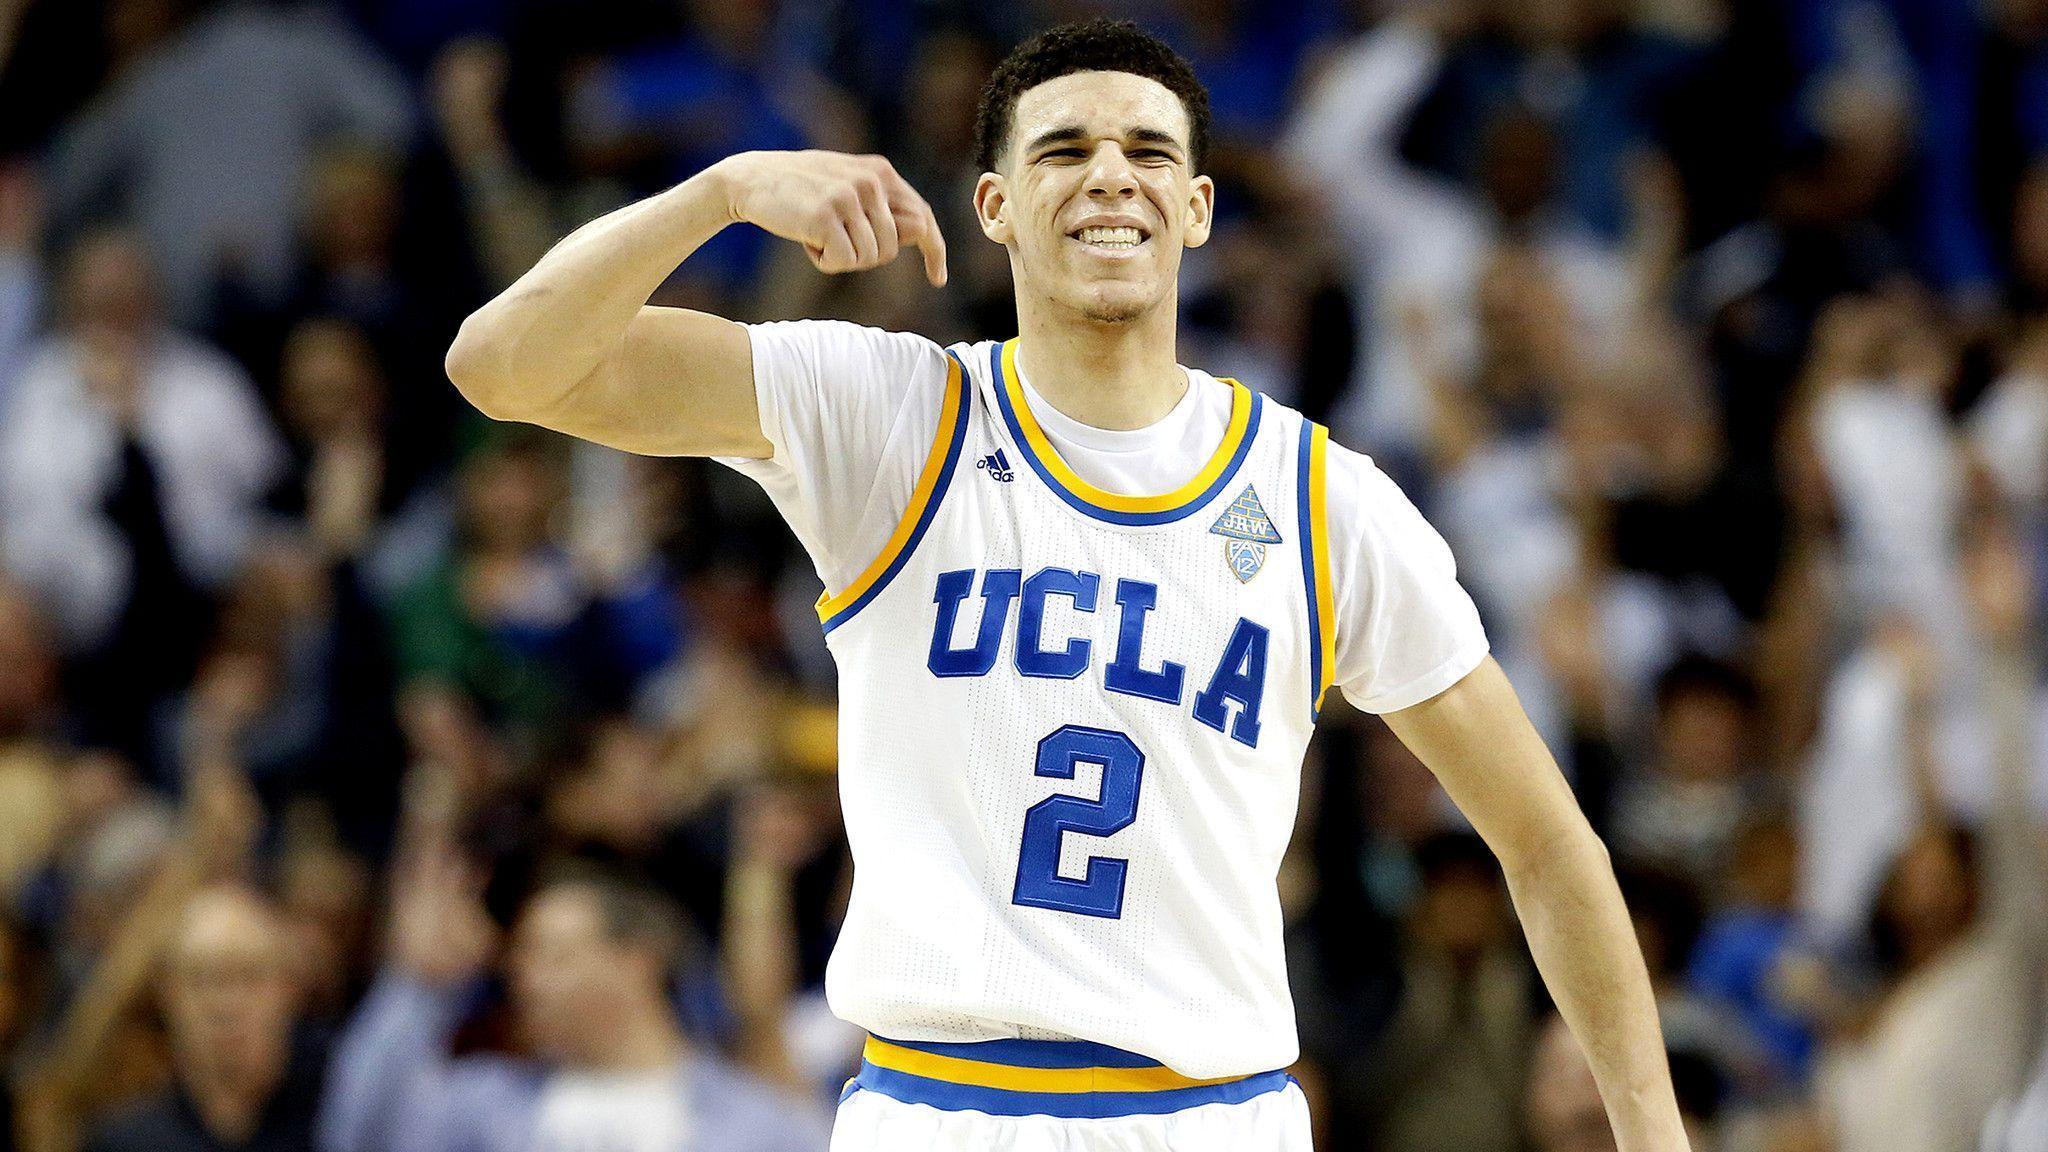 Father of UCLA star Lonzo Ball: 'He's going to be better than